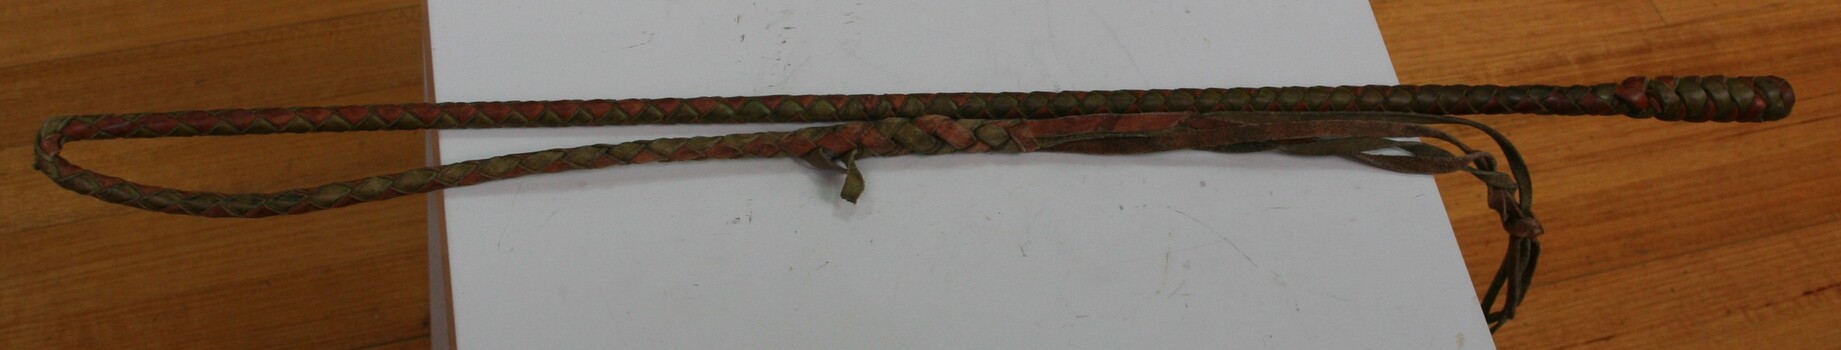 Handled whip as used to encourage horses on carts